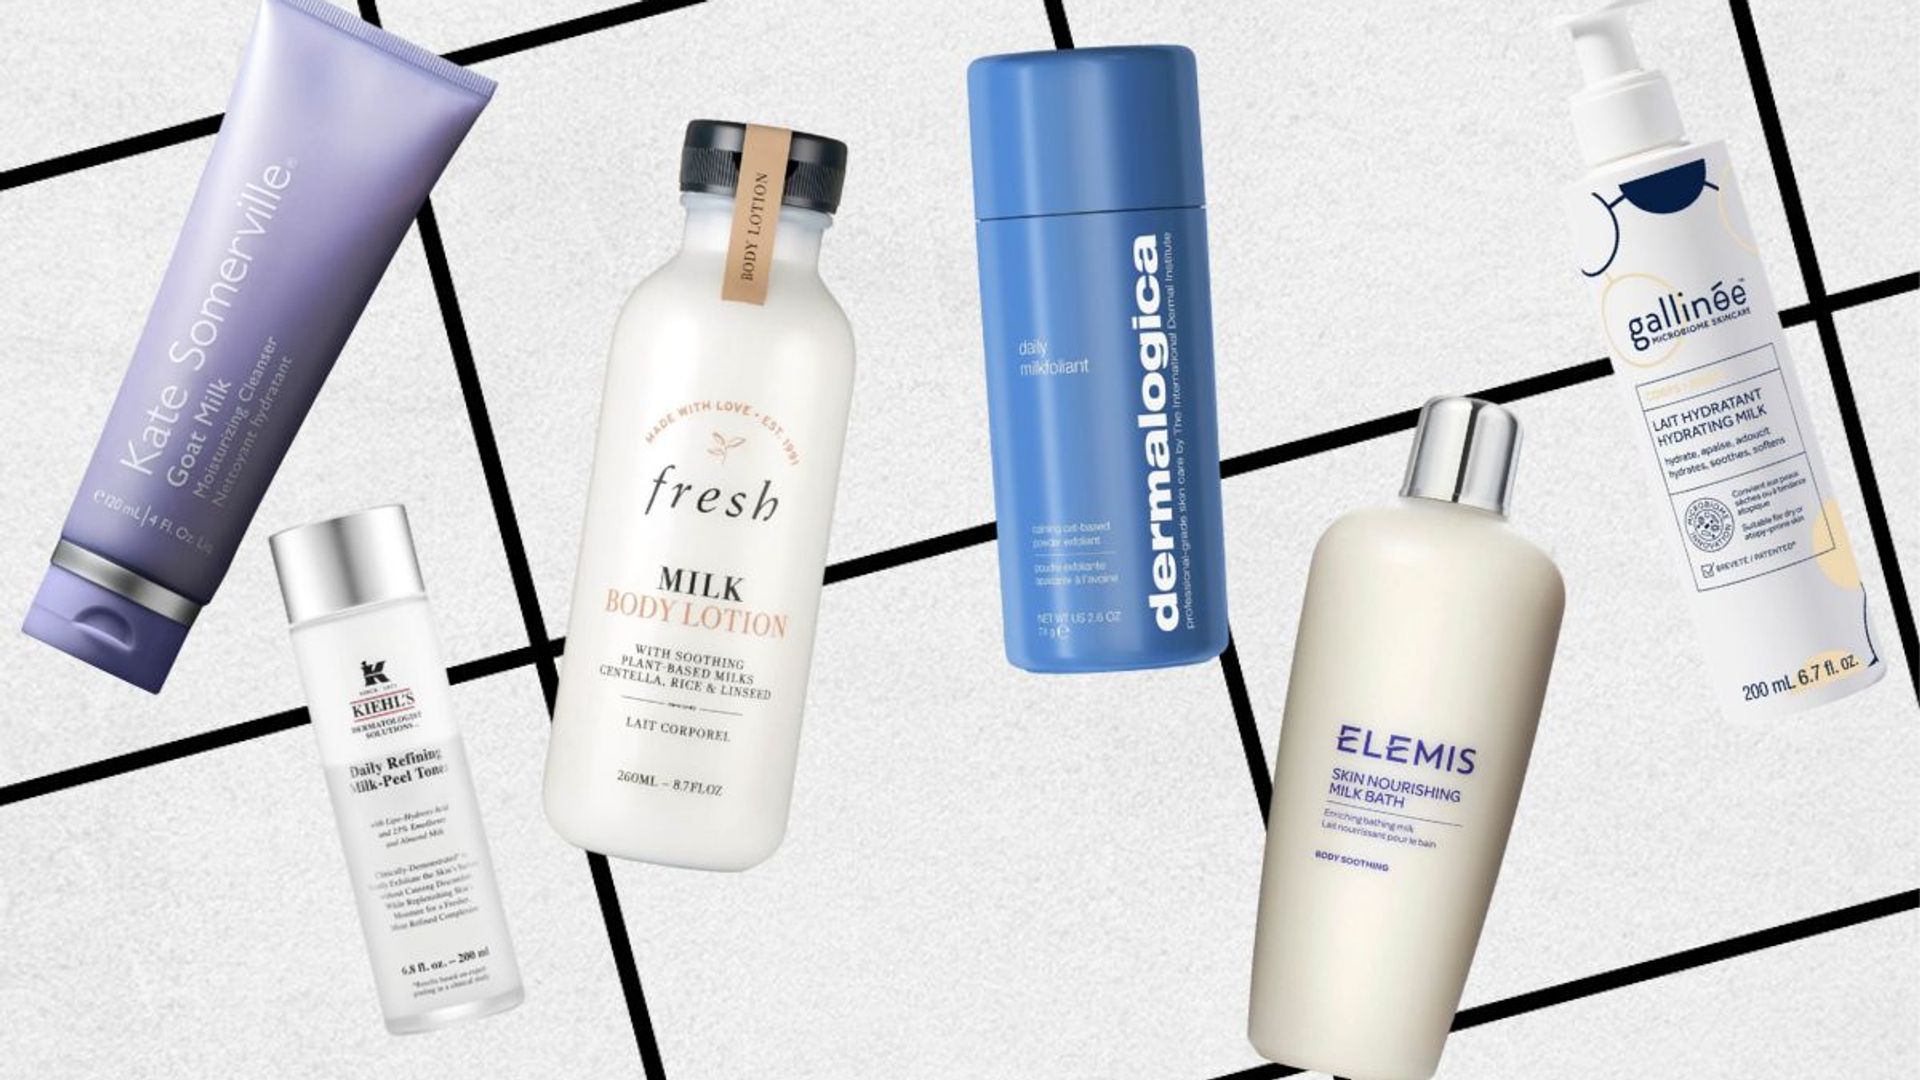 Milk is the skincare ingredient taking over, here's our pick of the best products